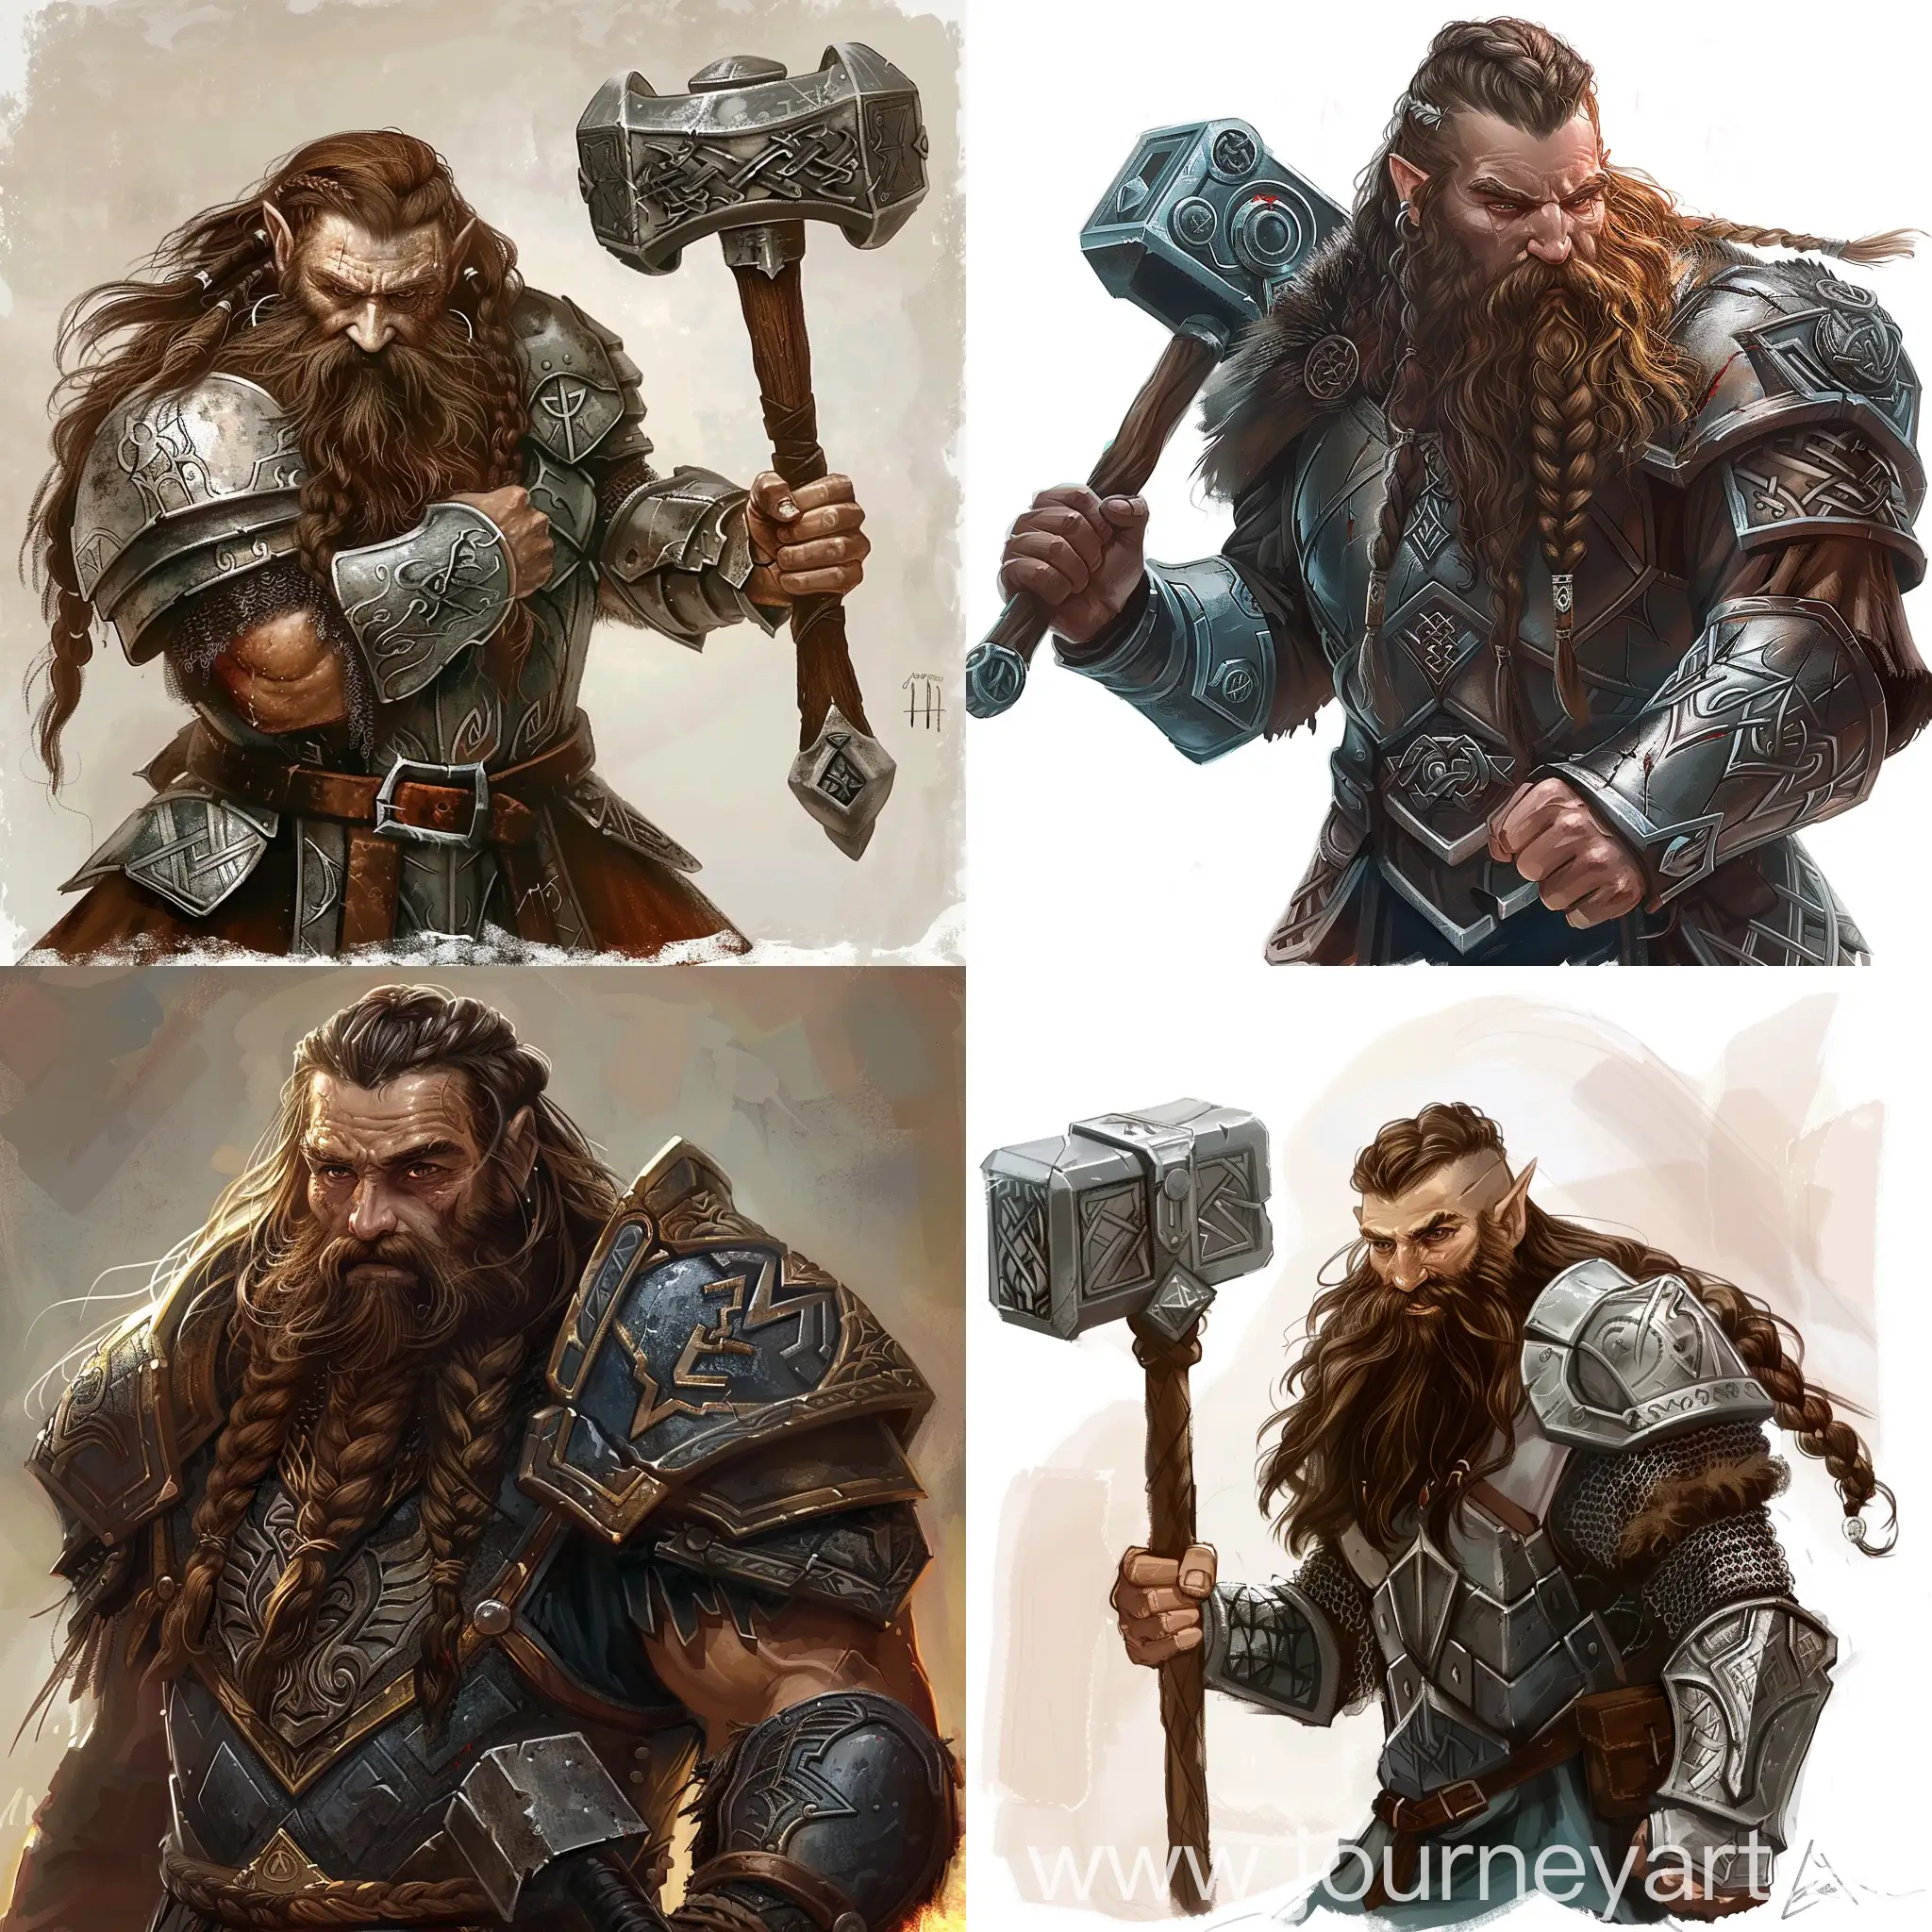 Dwarf-Warrior-Wielding-Iron-Hammer-in-Lord-of-the-Rings-Style-Art